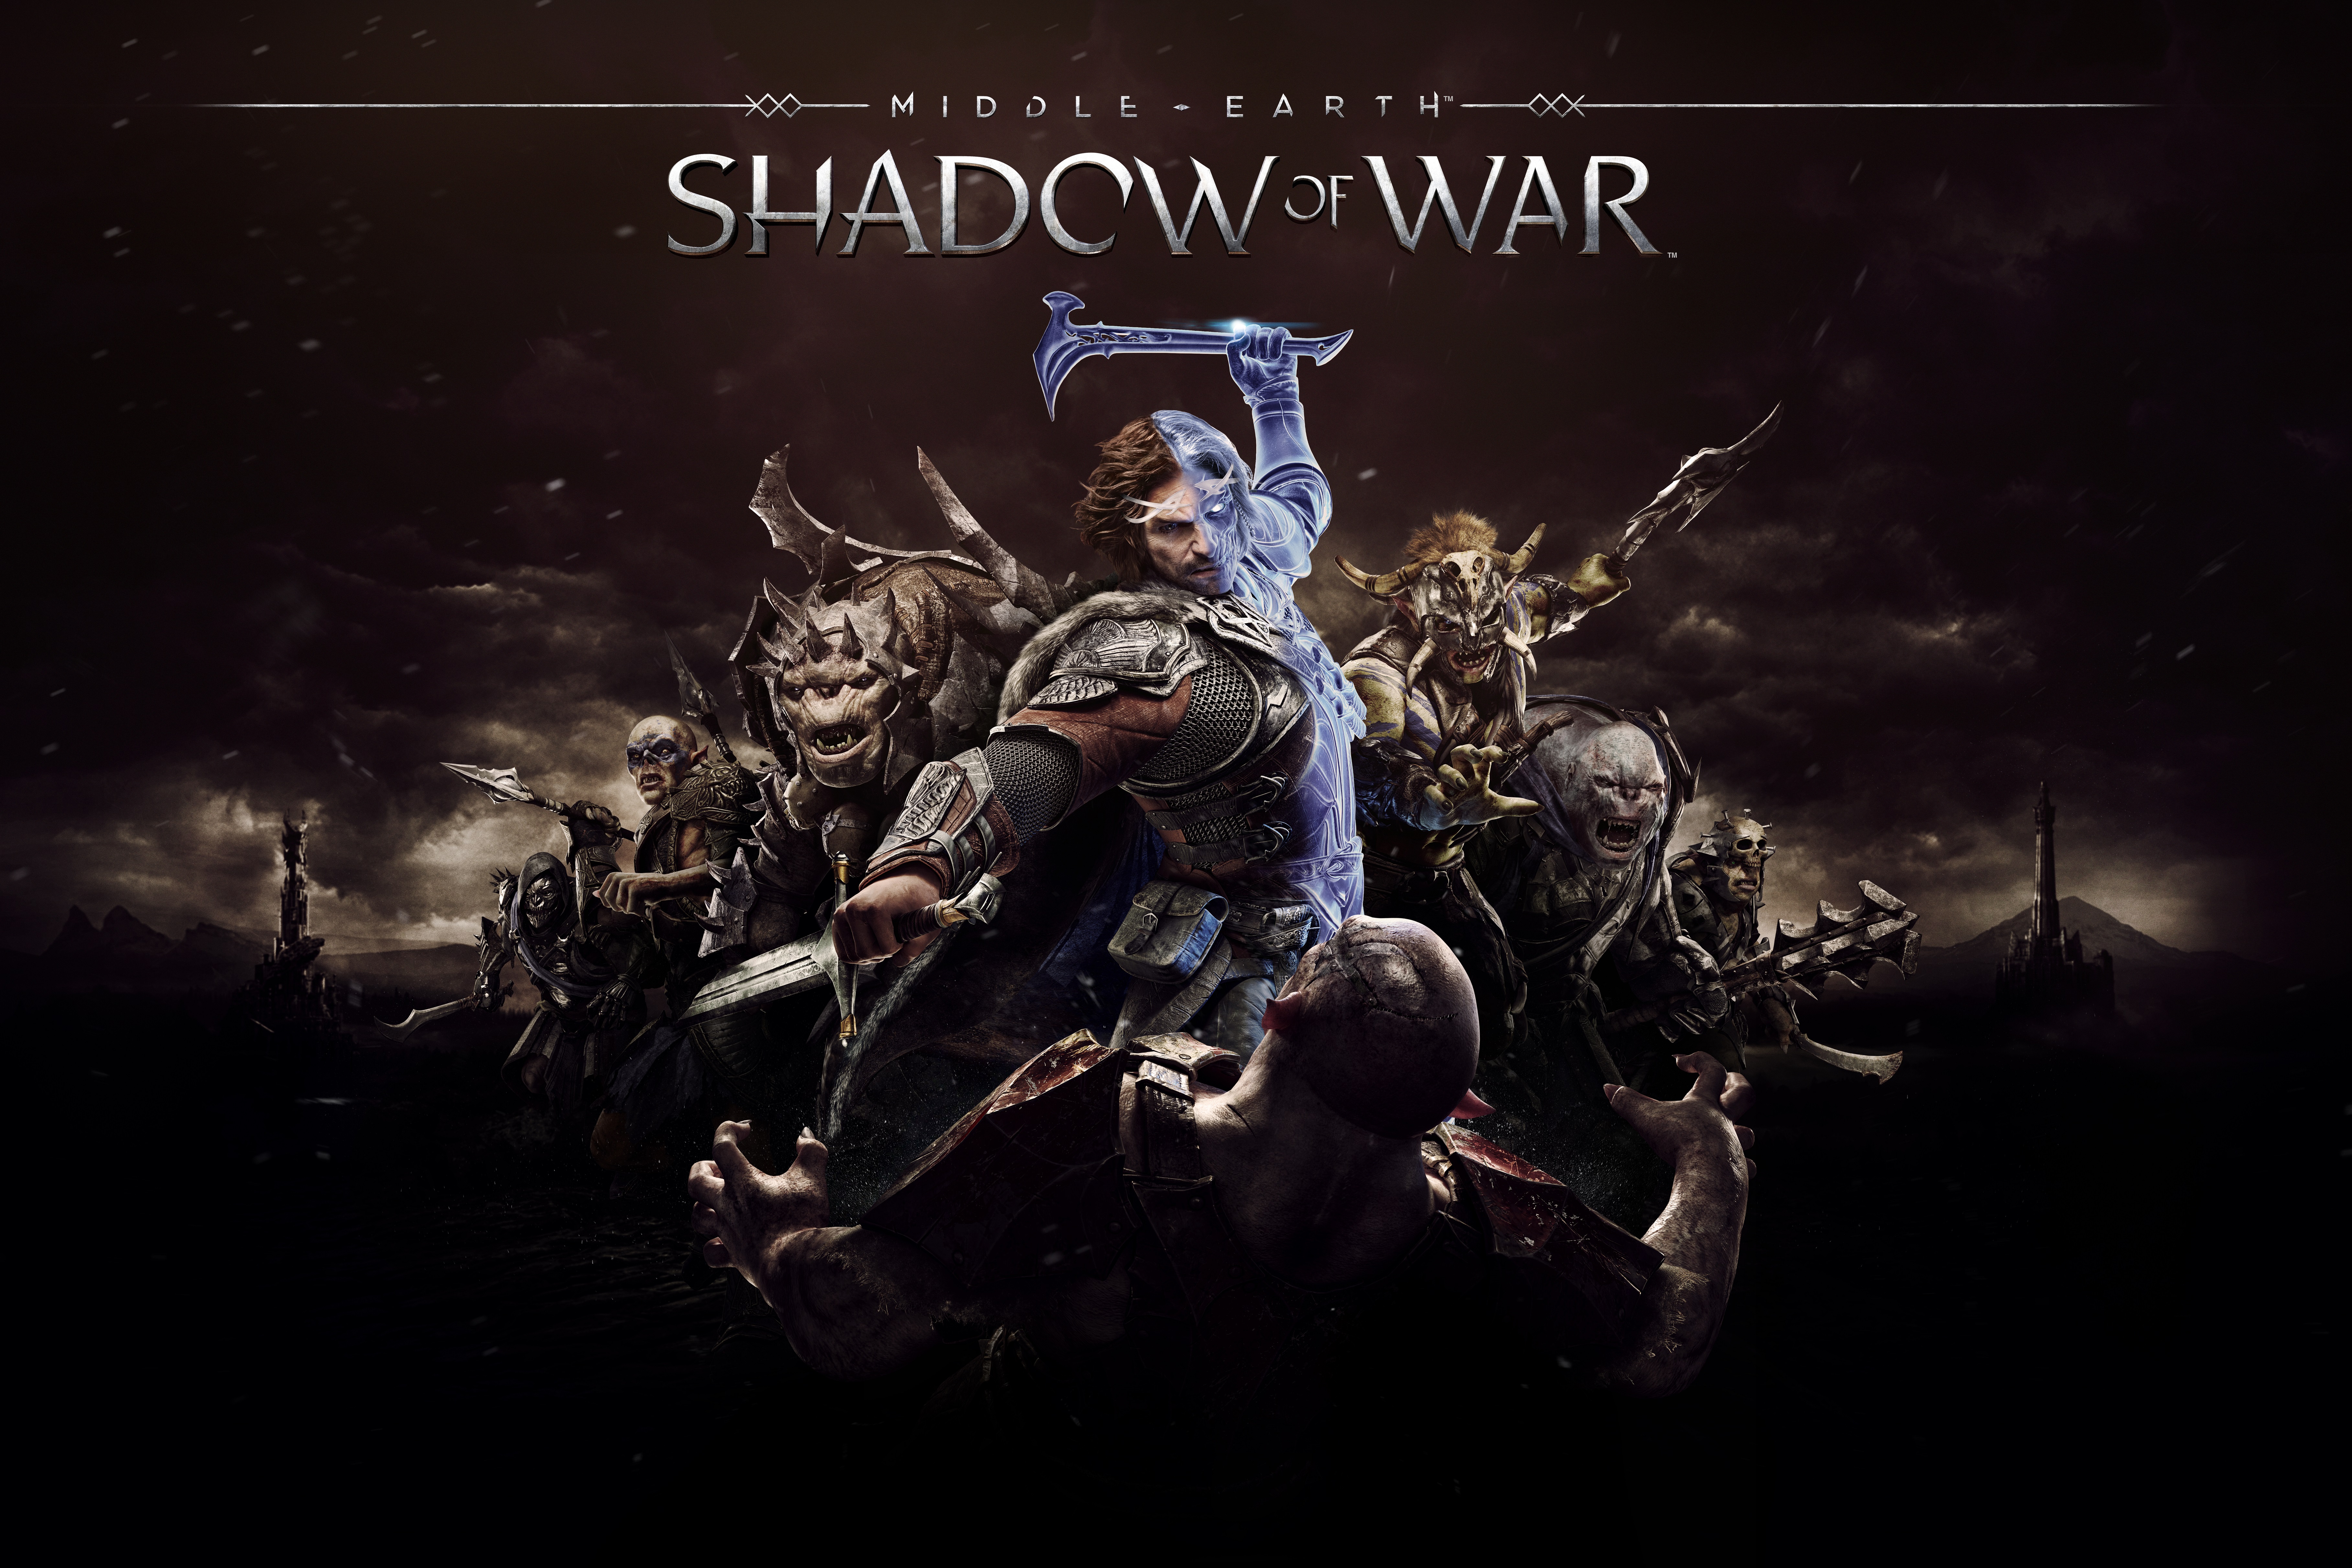 orcs, Video games, Middle Earth: Shadow of War, Talion, Orc, The Lord of the Rings, Hammer, Middle earth, Celebrimbor Wallpaper